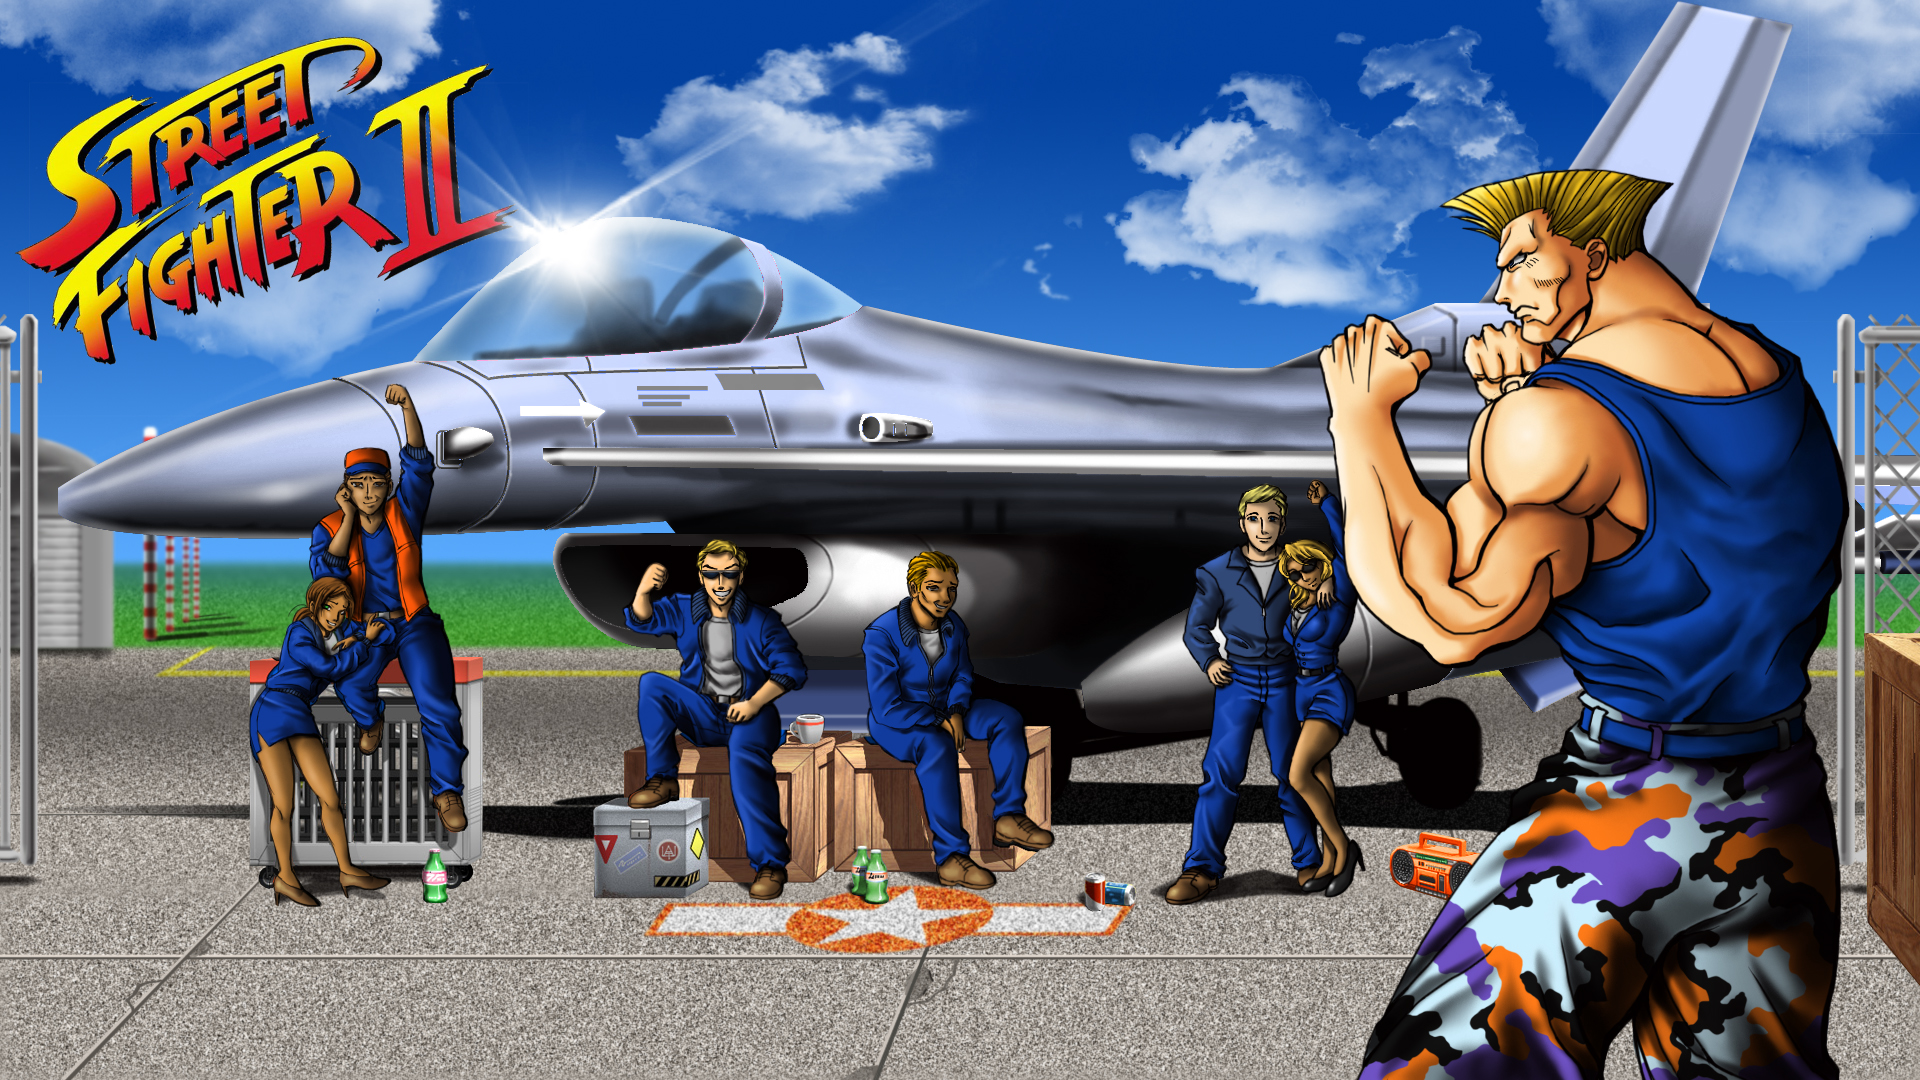 Guile from Street Fighter 2